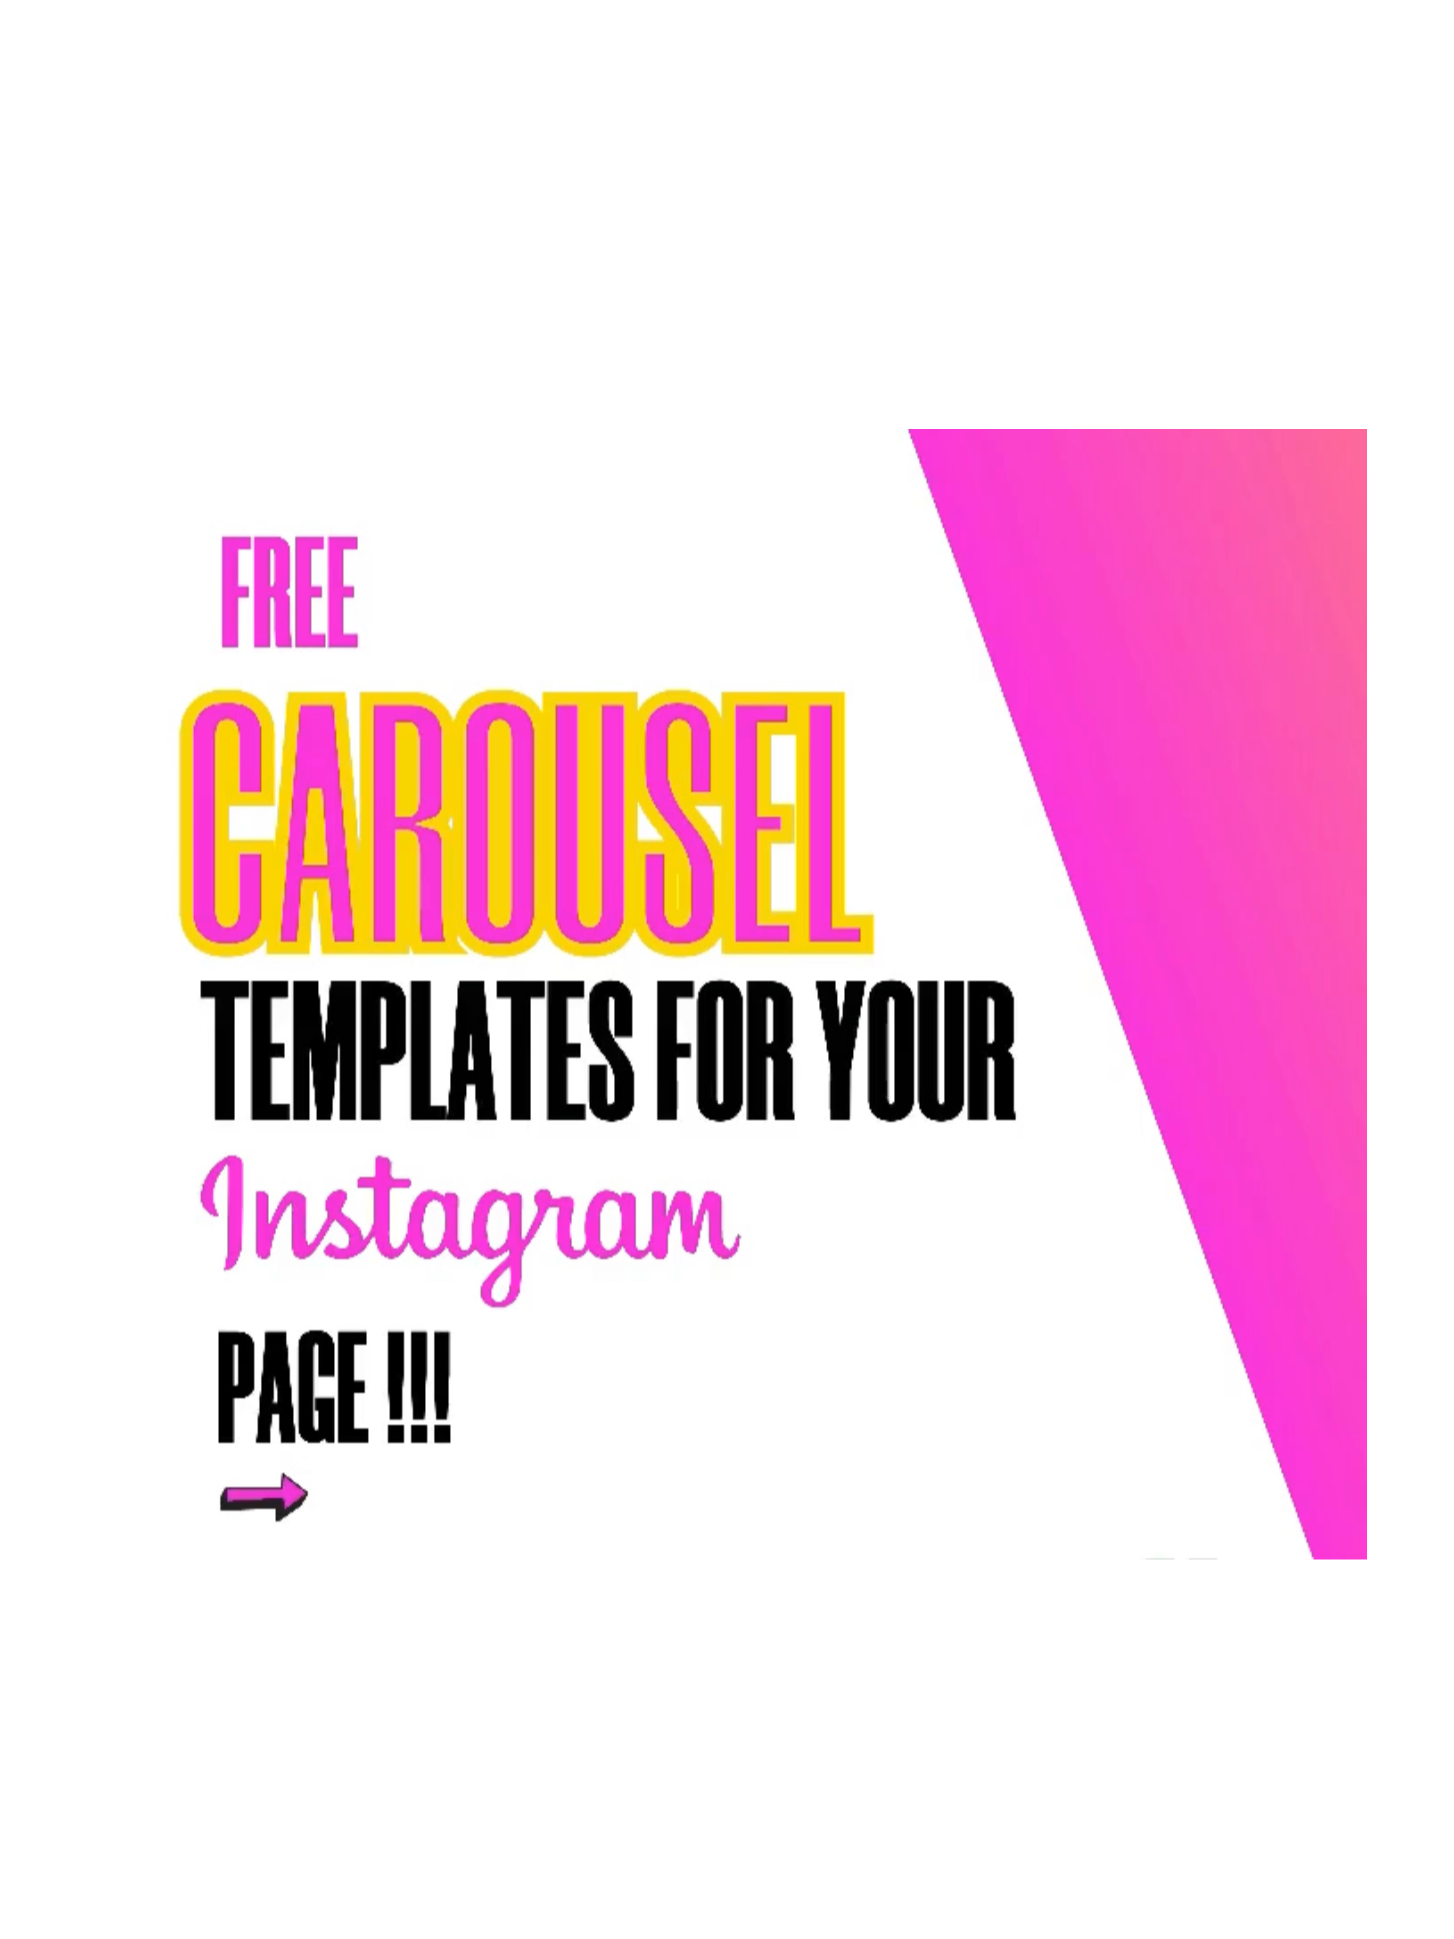 Free Carousel Templates for your Instagram Content